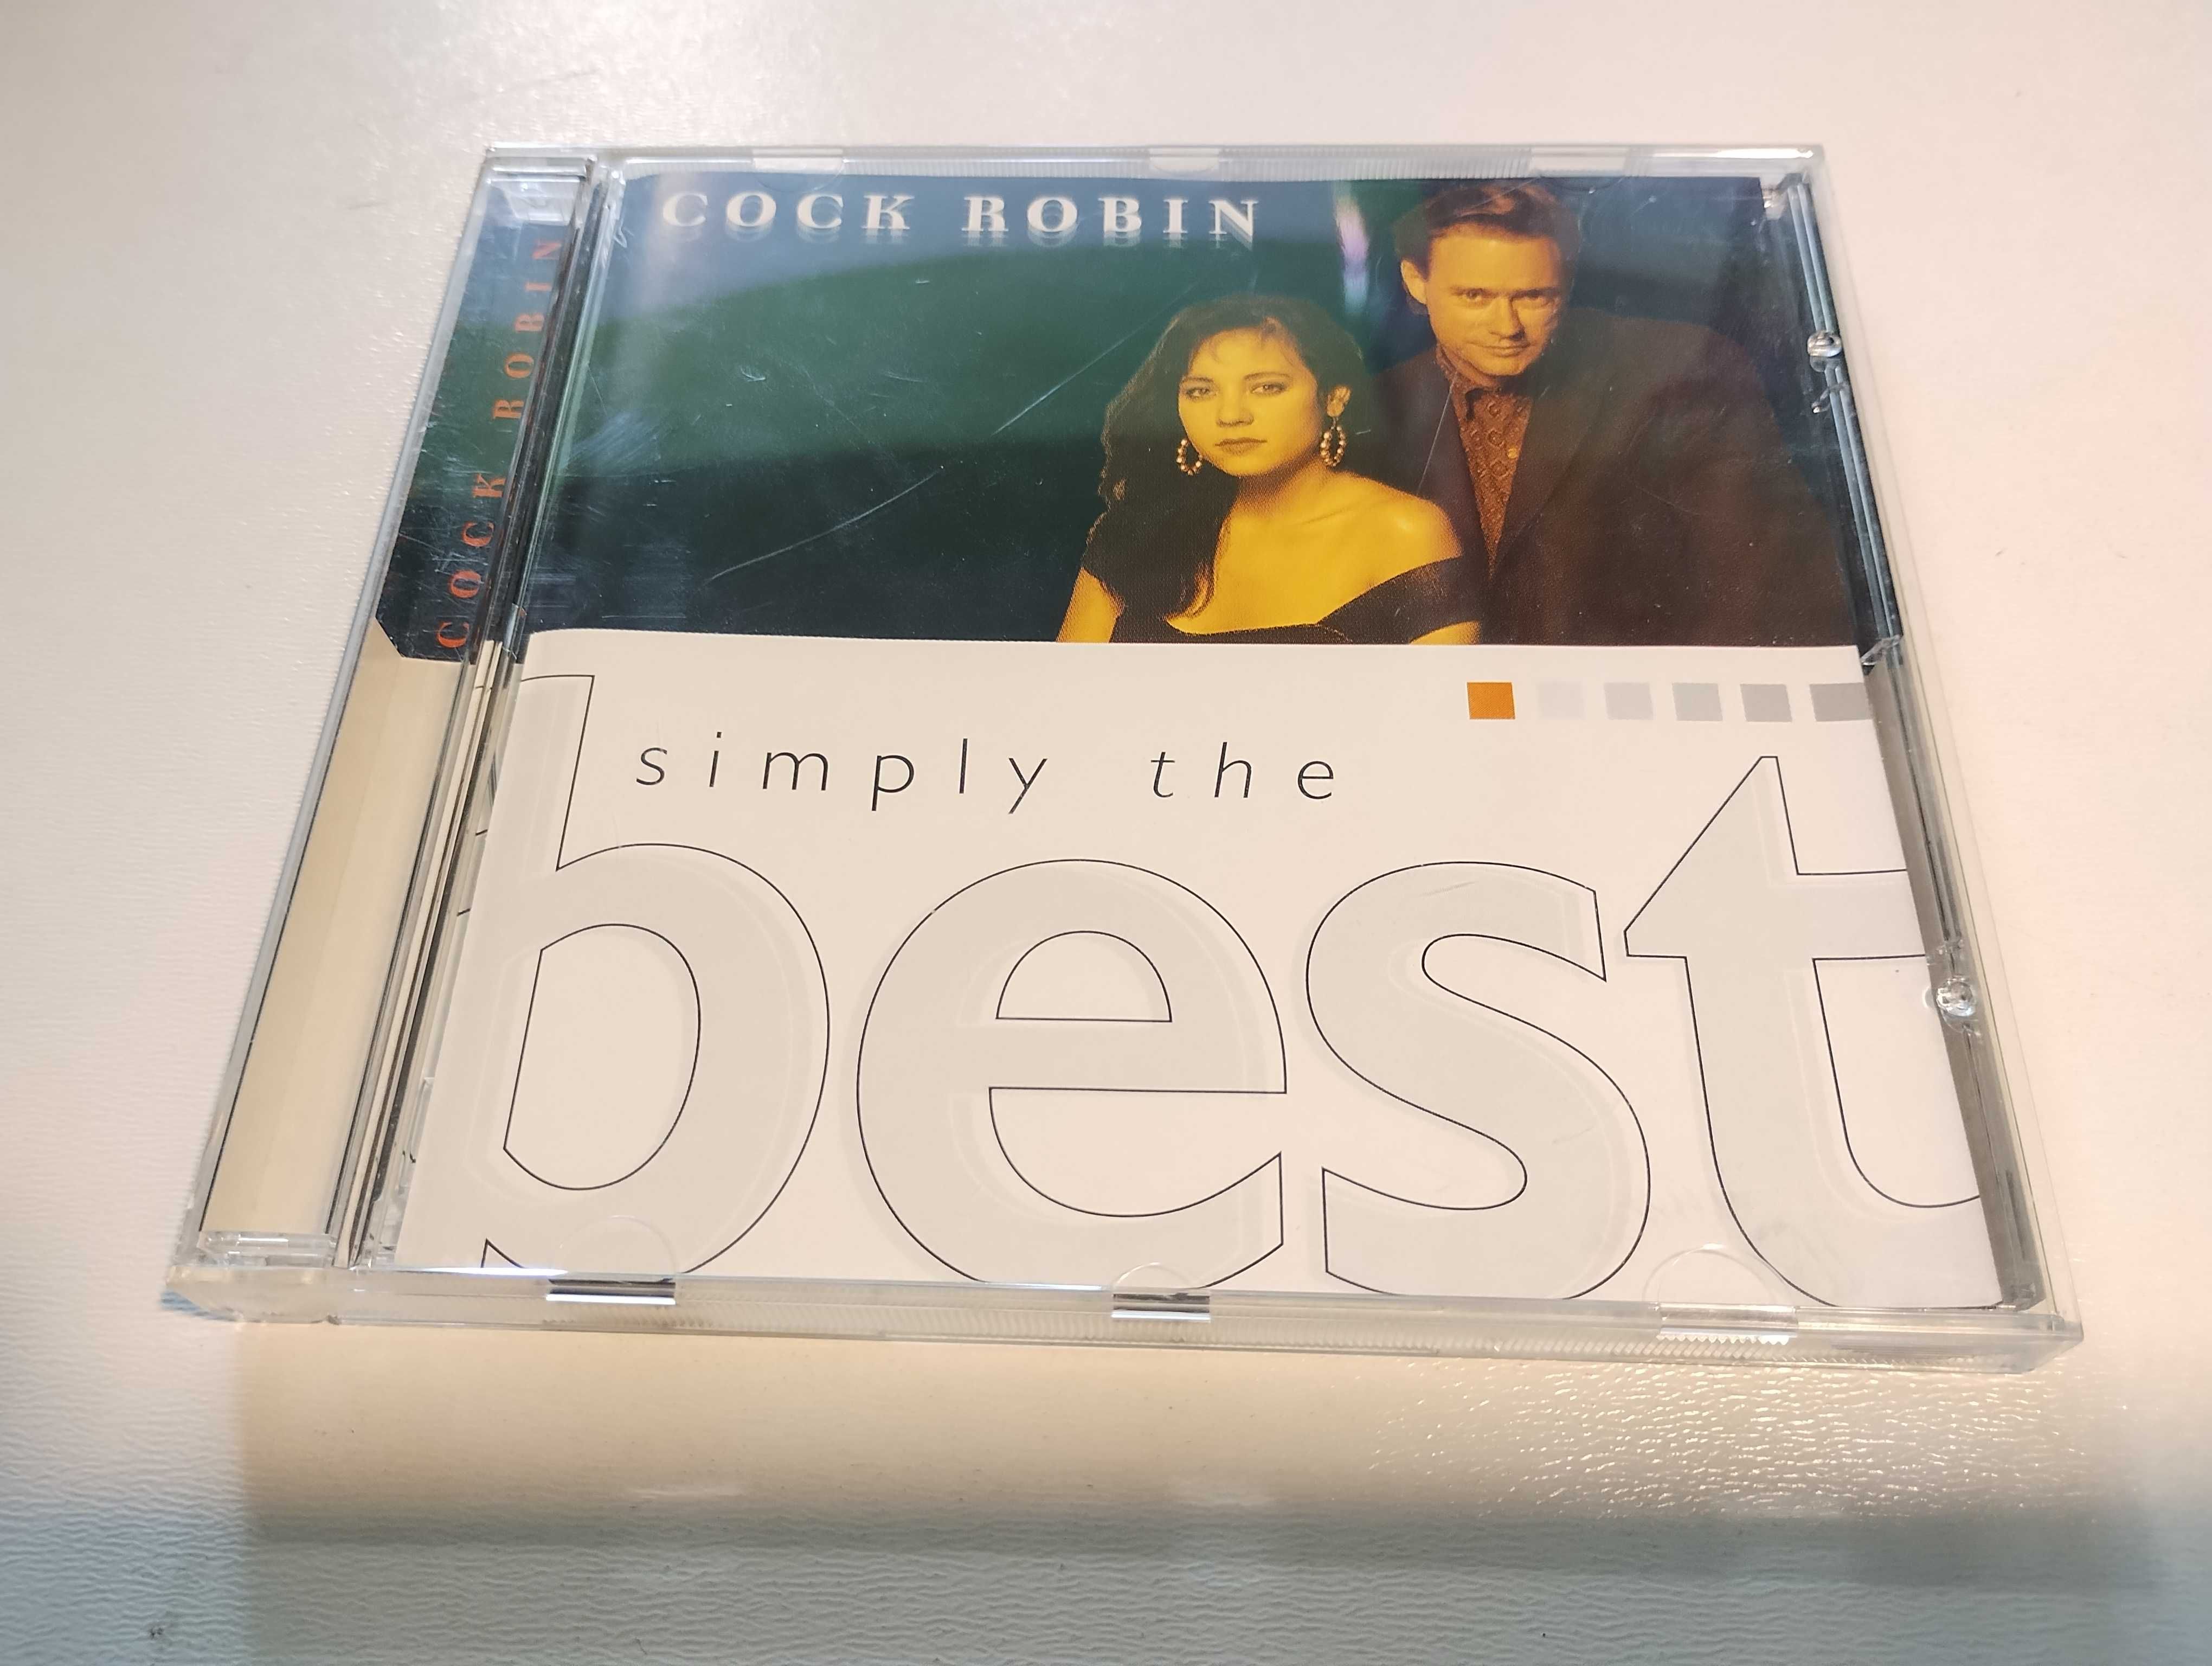 Cock Robin simply the best CD